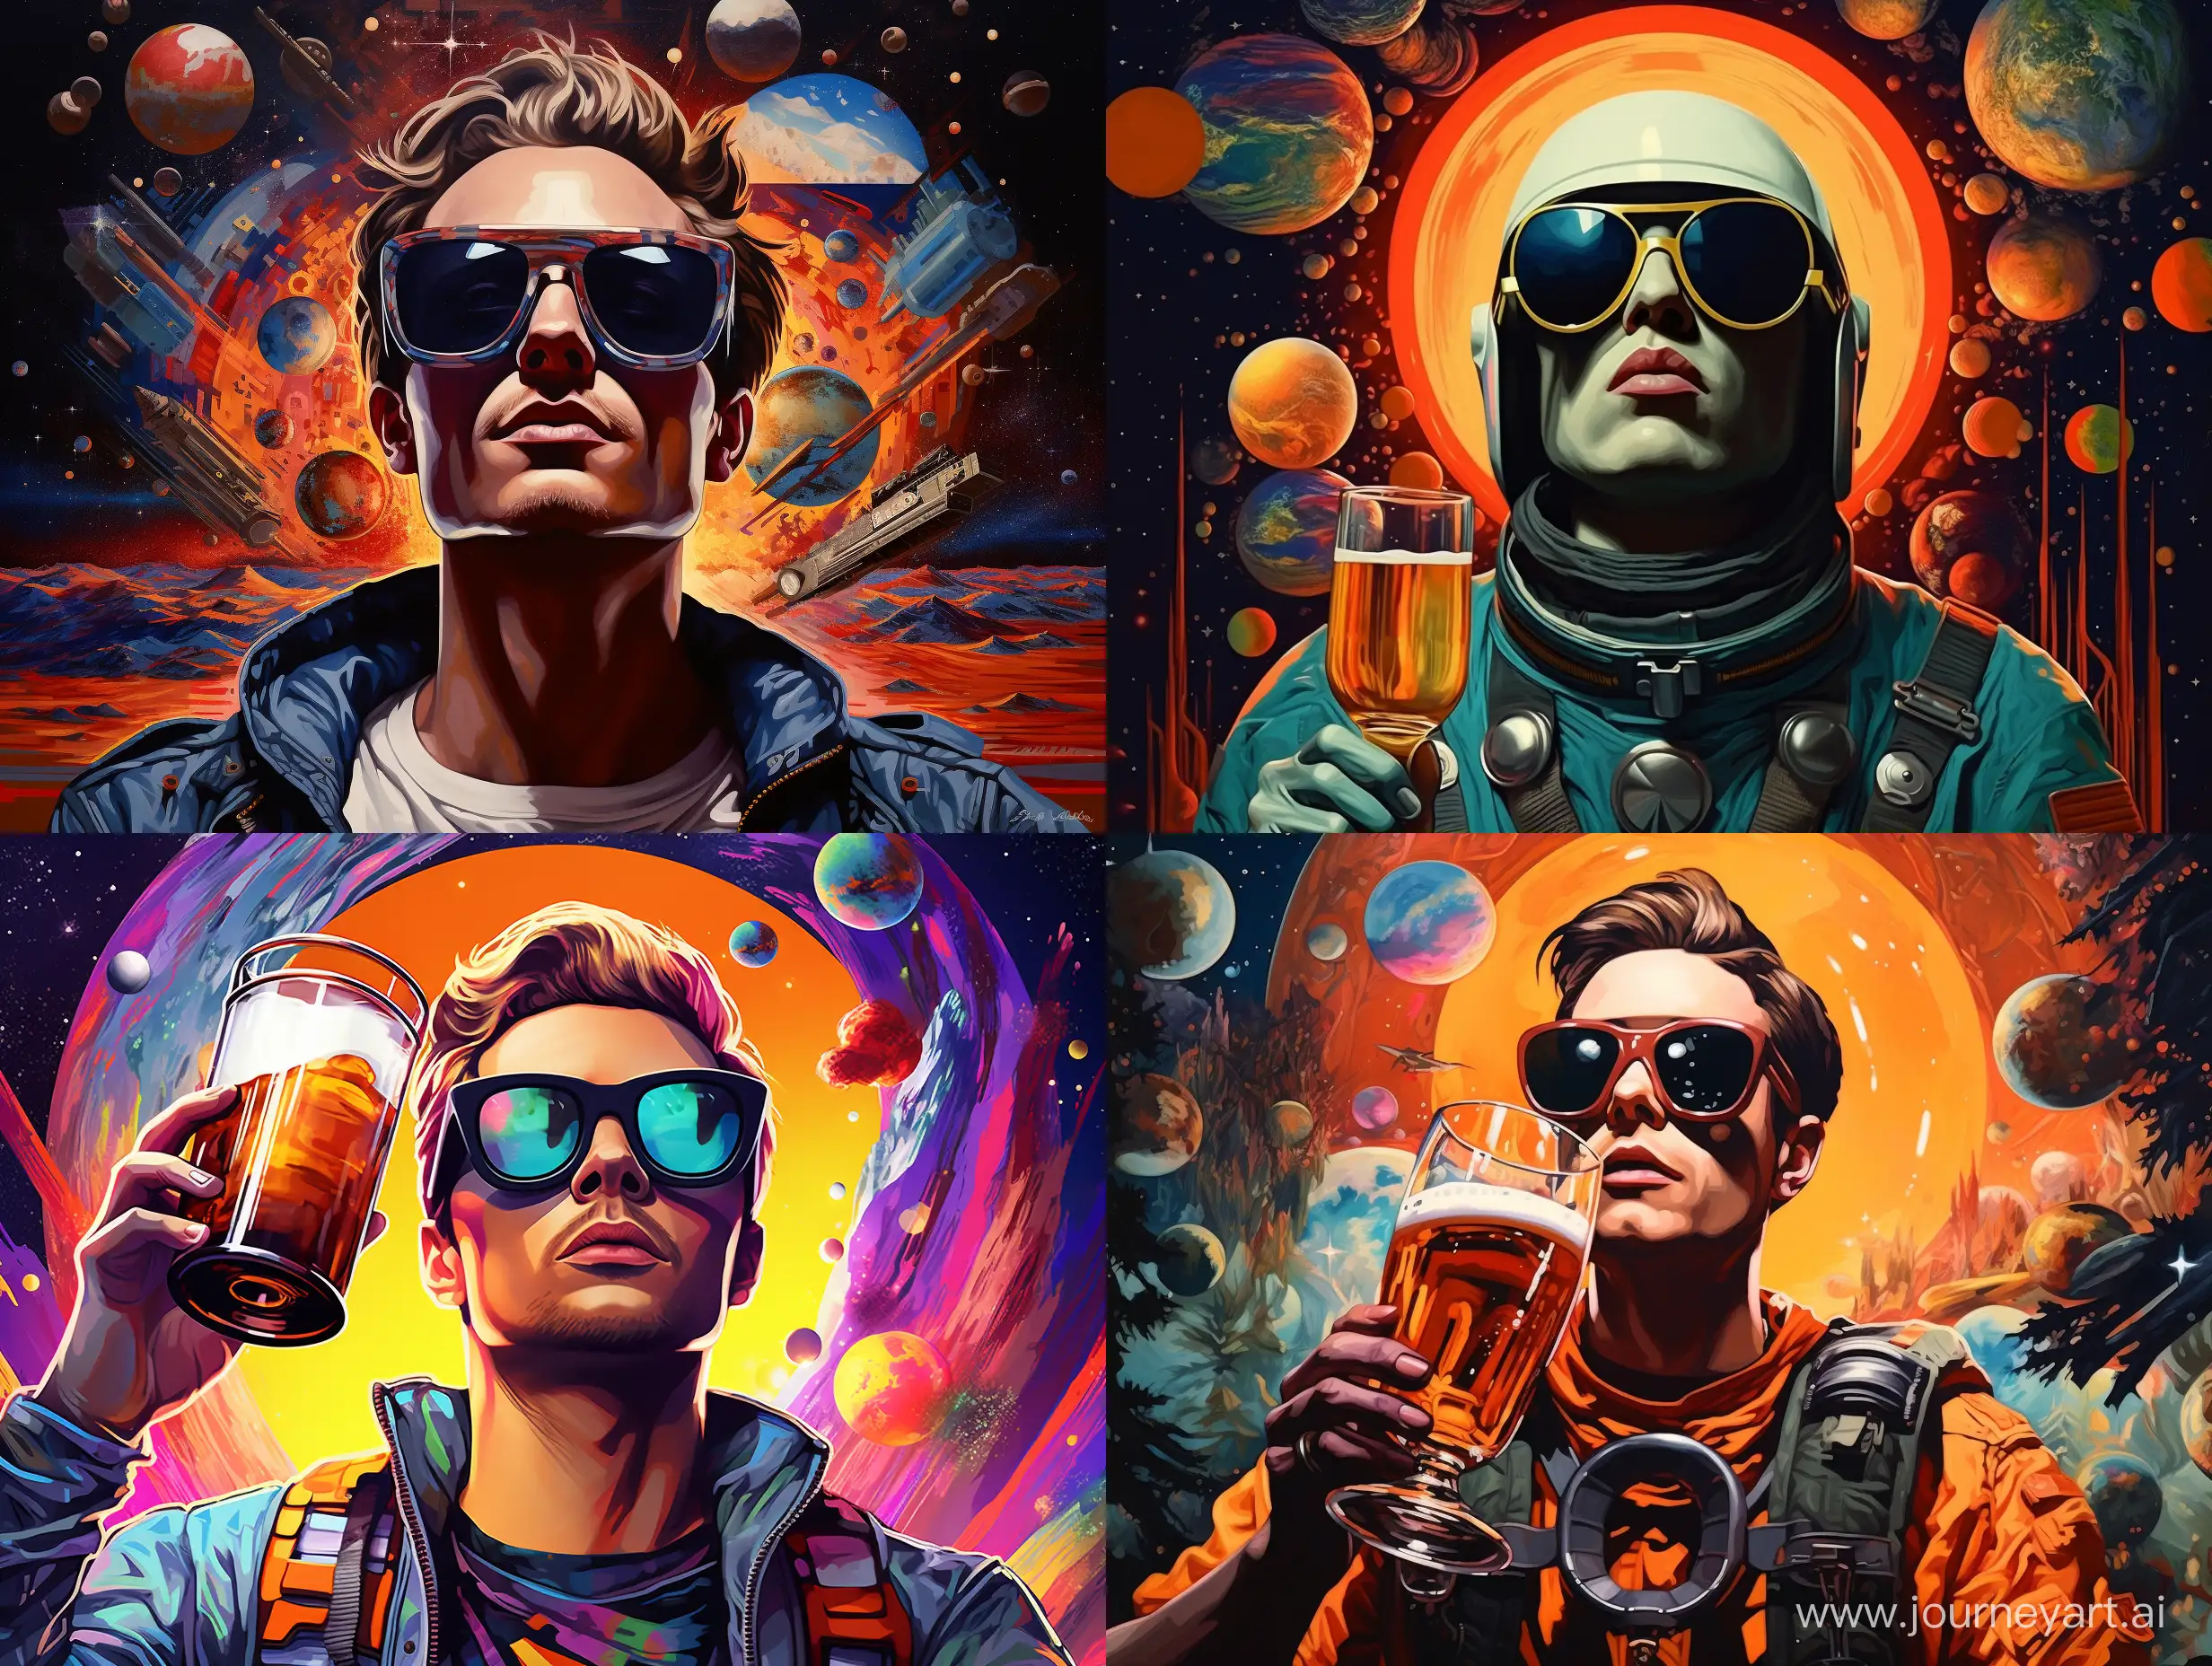 Futuristic-Man-Exploring-Space-with-Magical-Glasses-and-Enjoying-a-PopArt-Beer